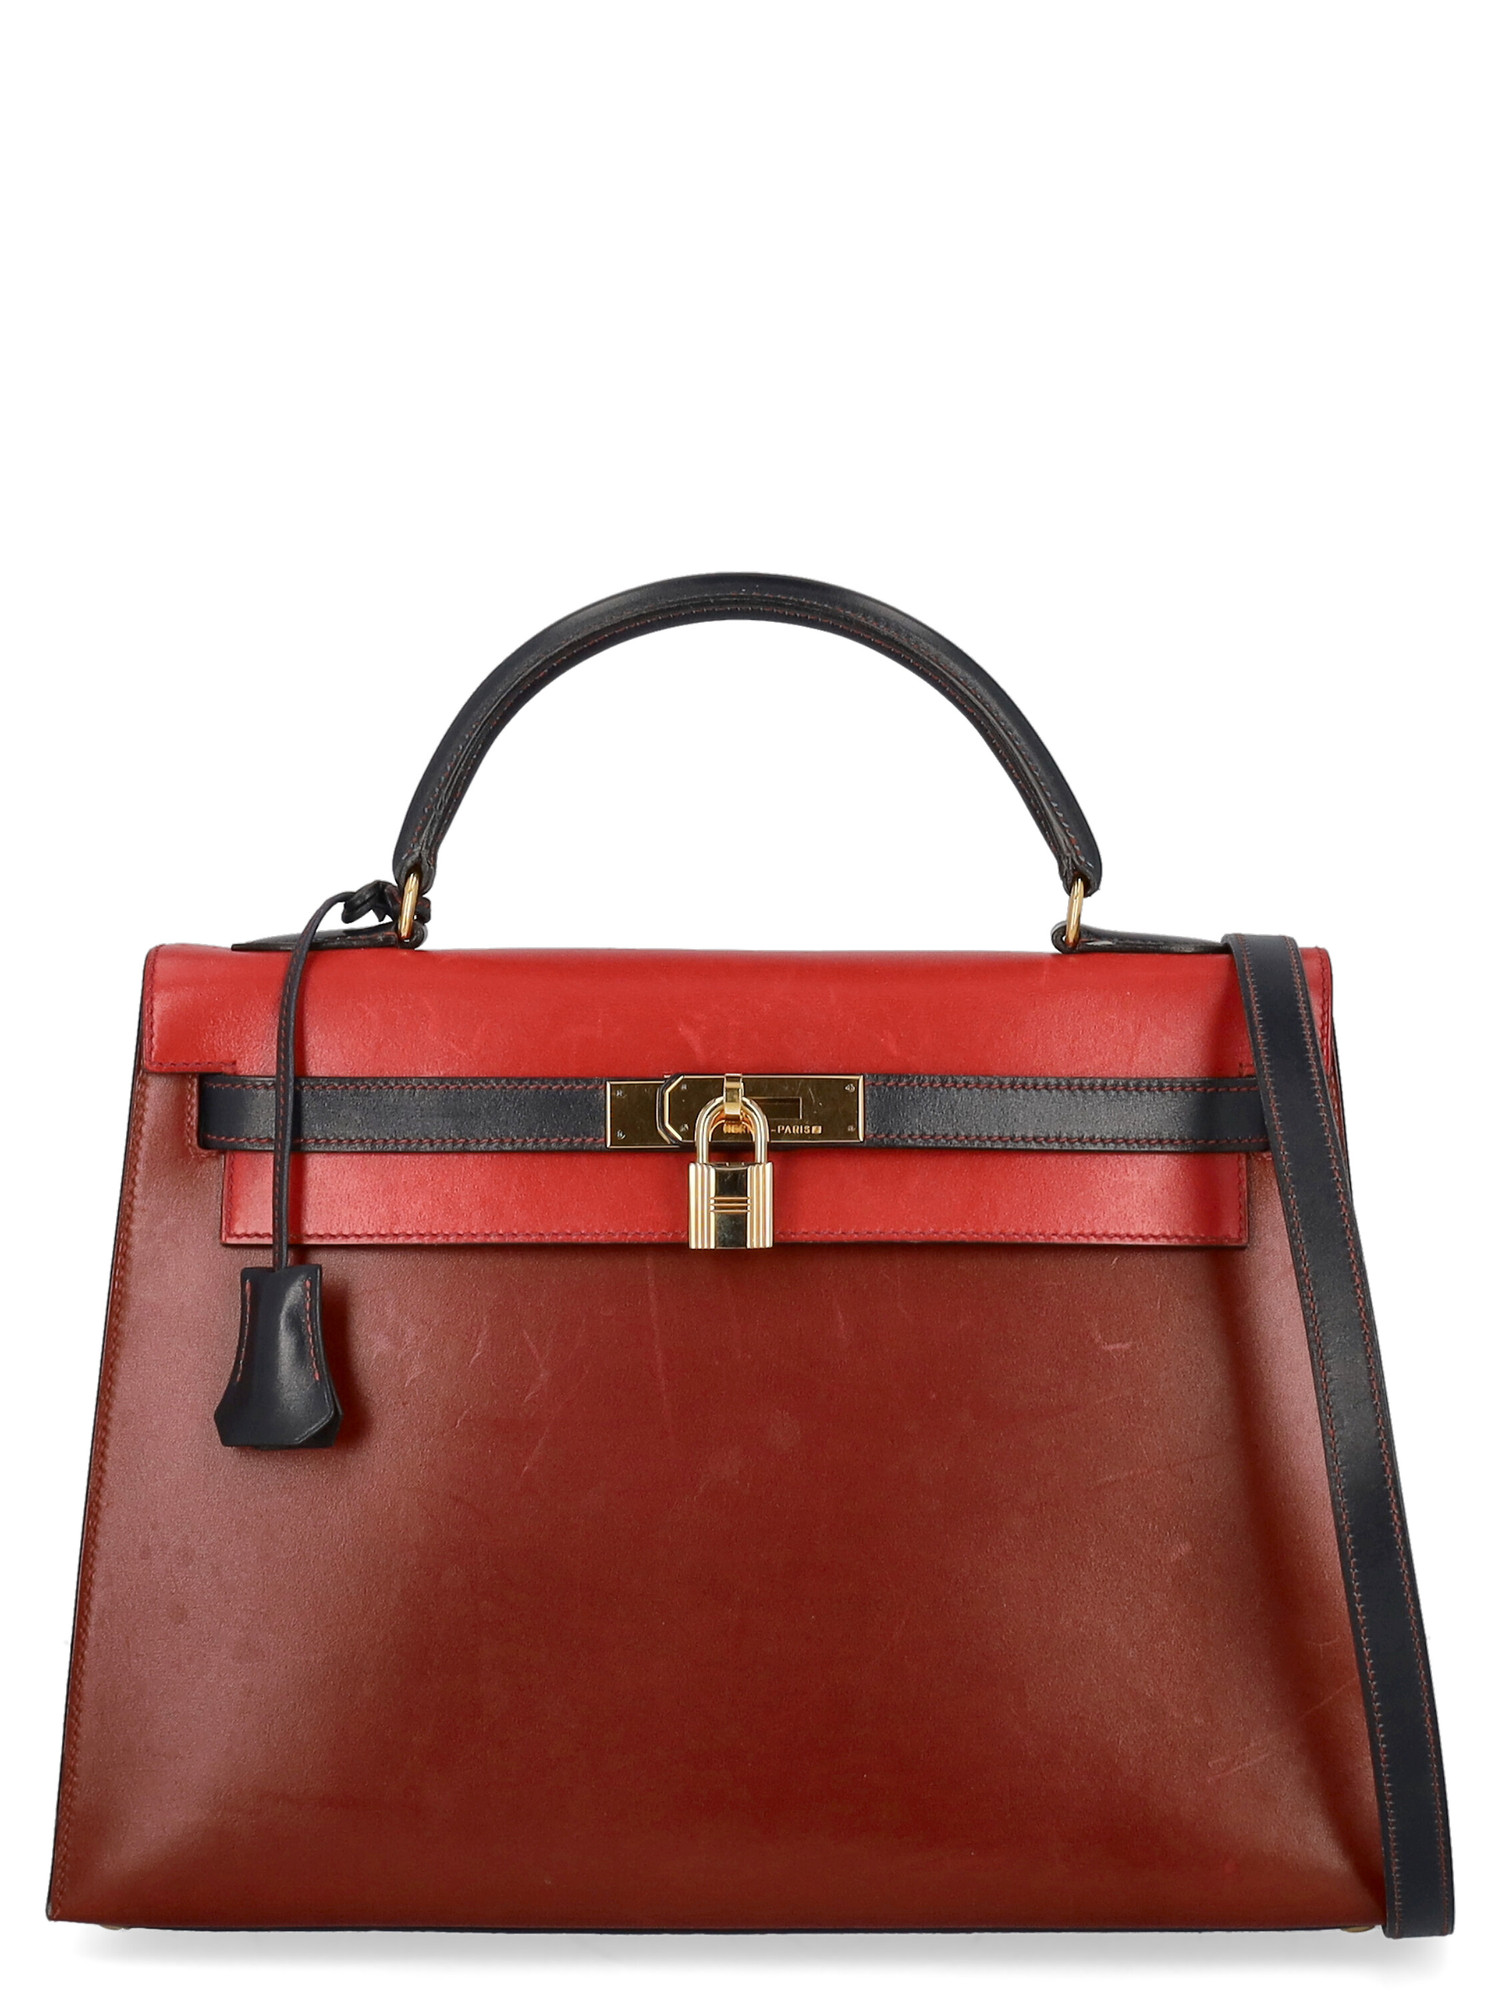 Condition: Good, Solid Color Leather, Color: Burgundy, Navy, Red -  -  -